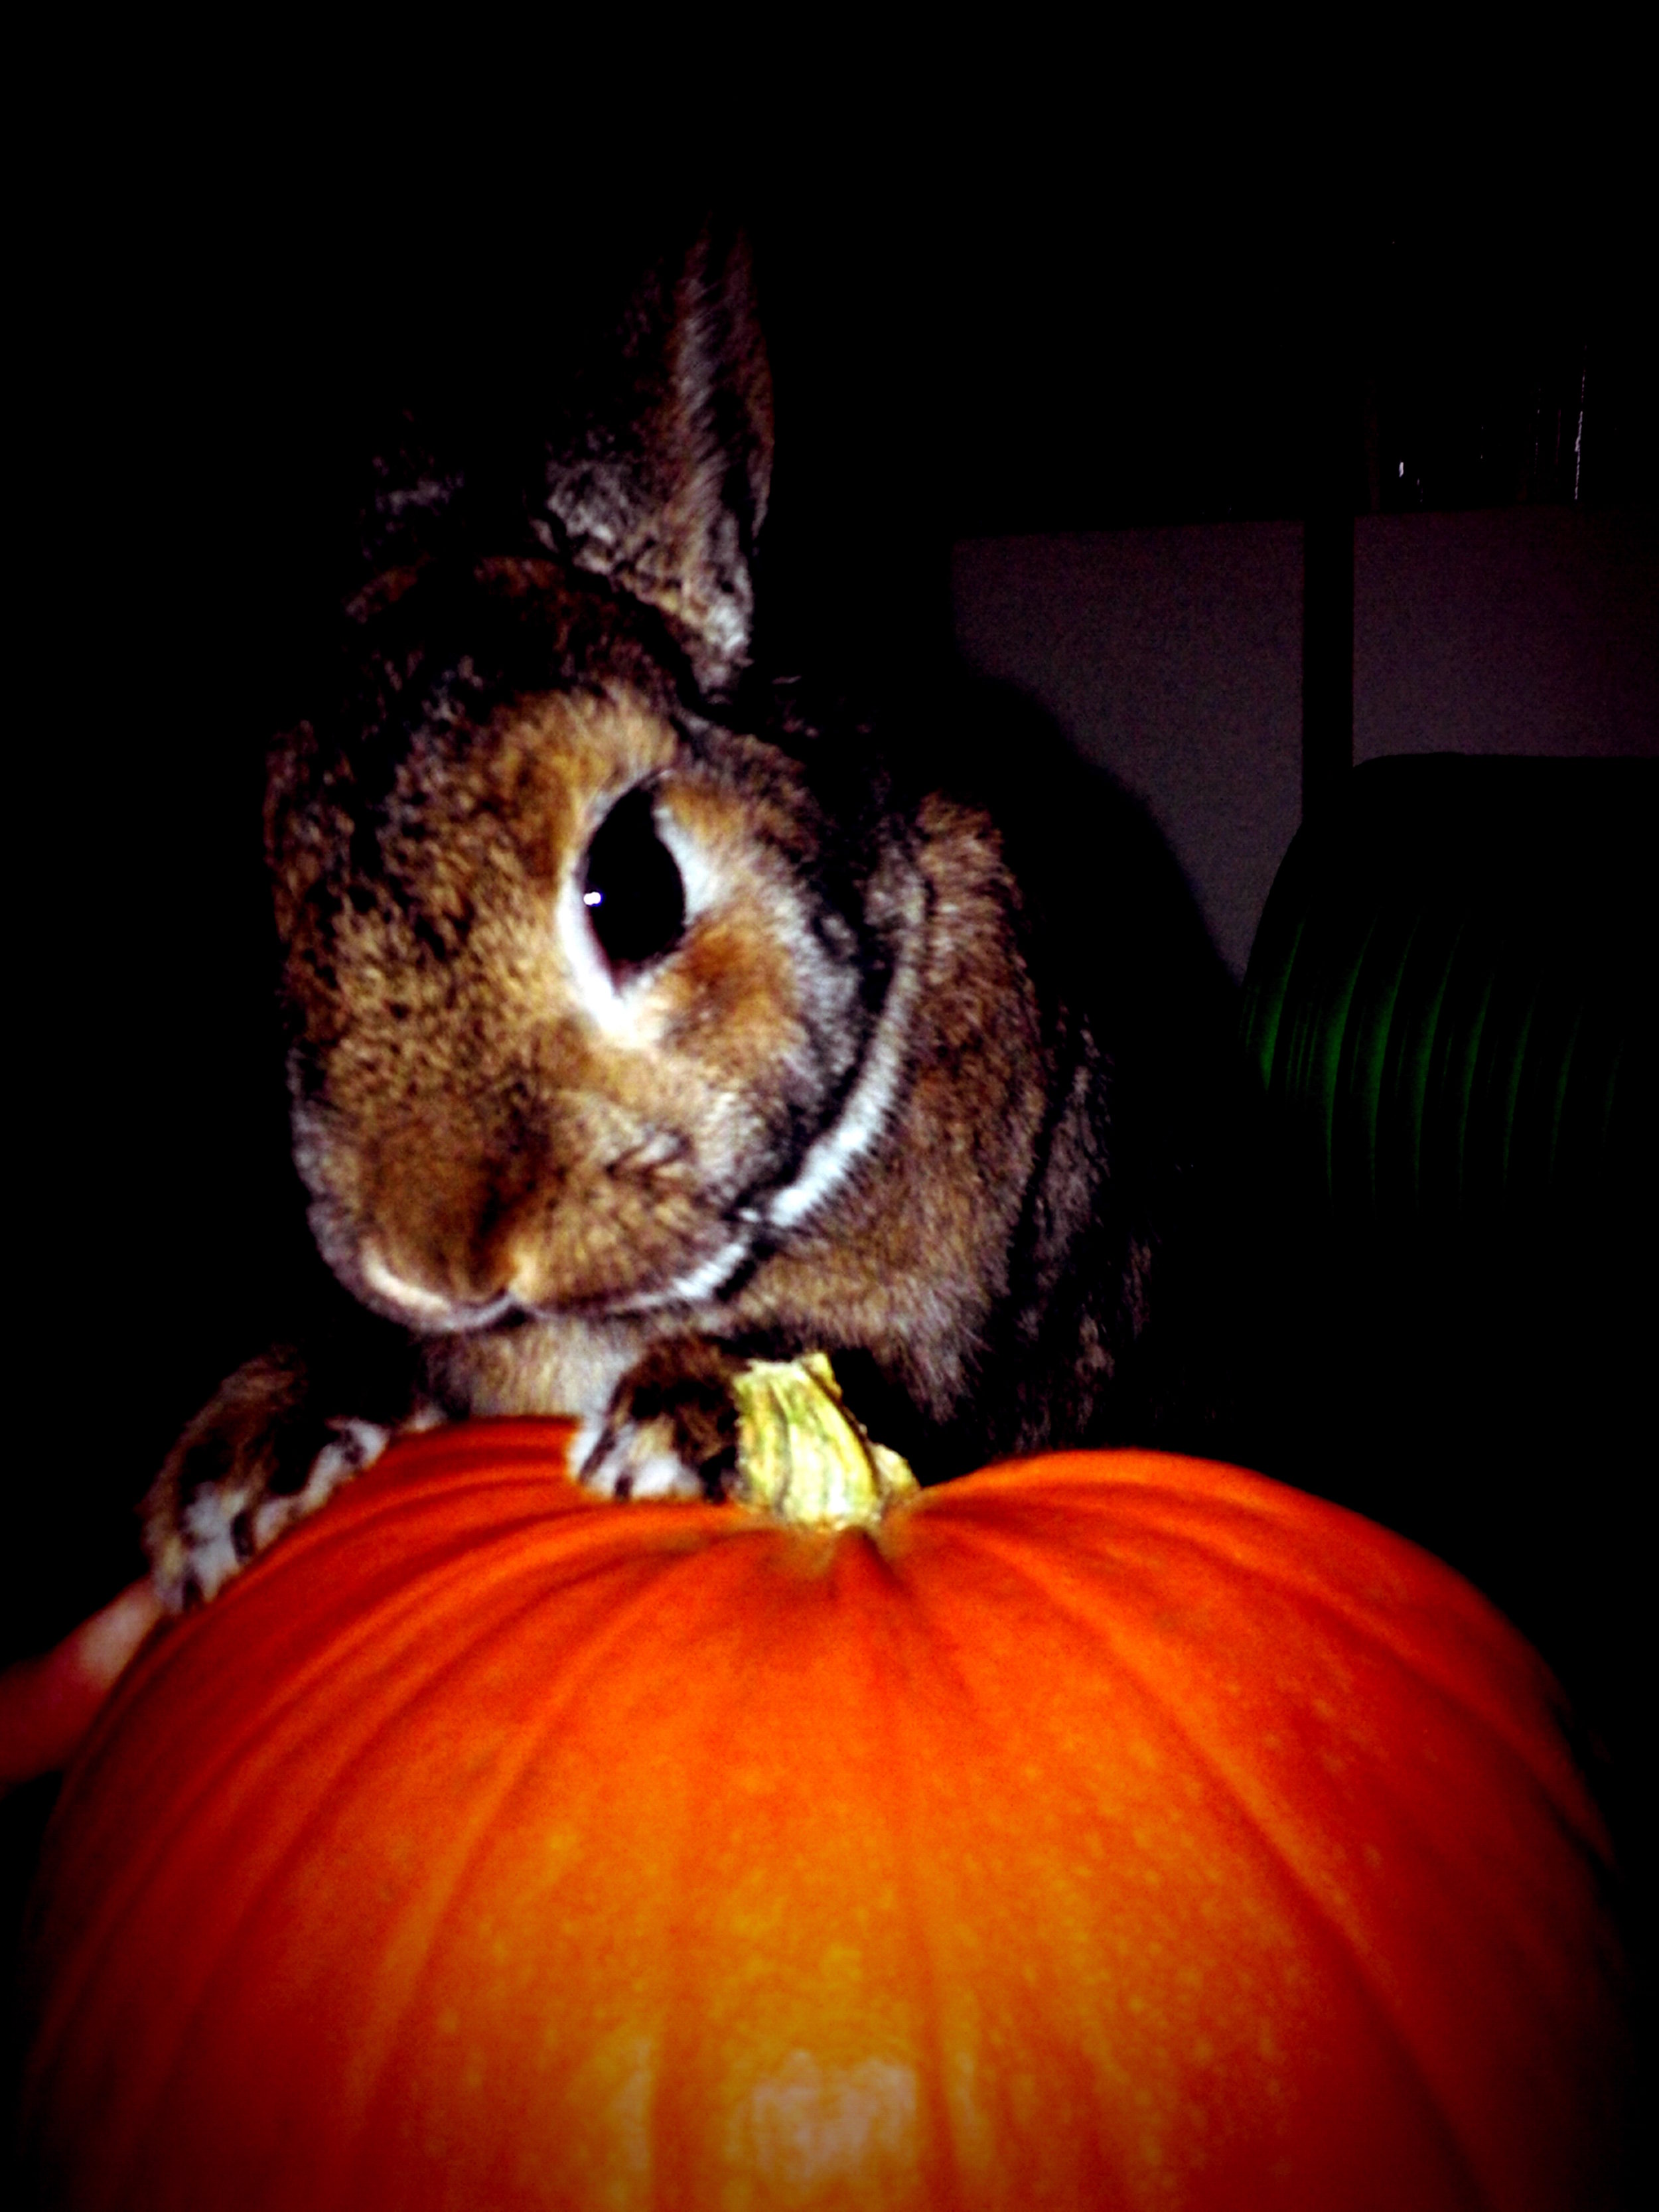 Bunny Looks for the Perfect Point to Start Carving a Jack-O'-Lantern